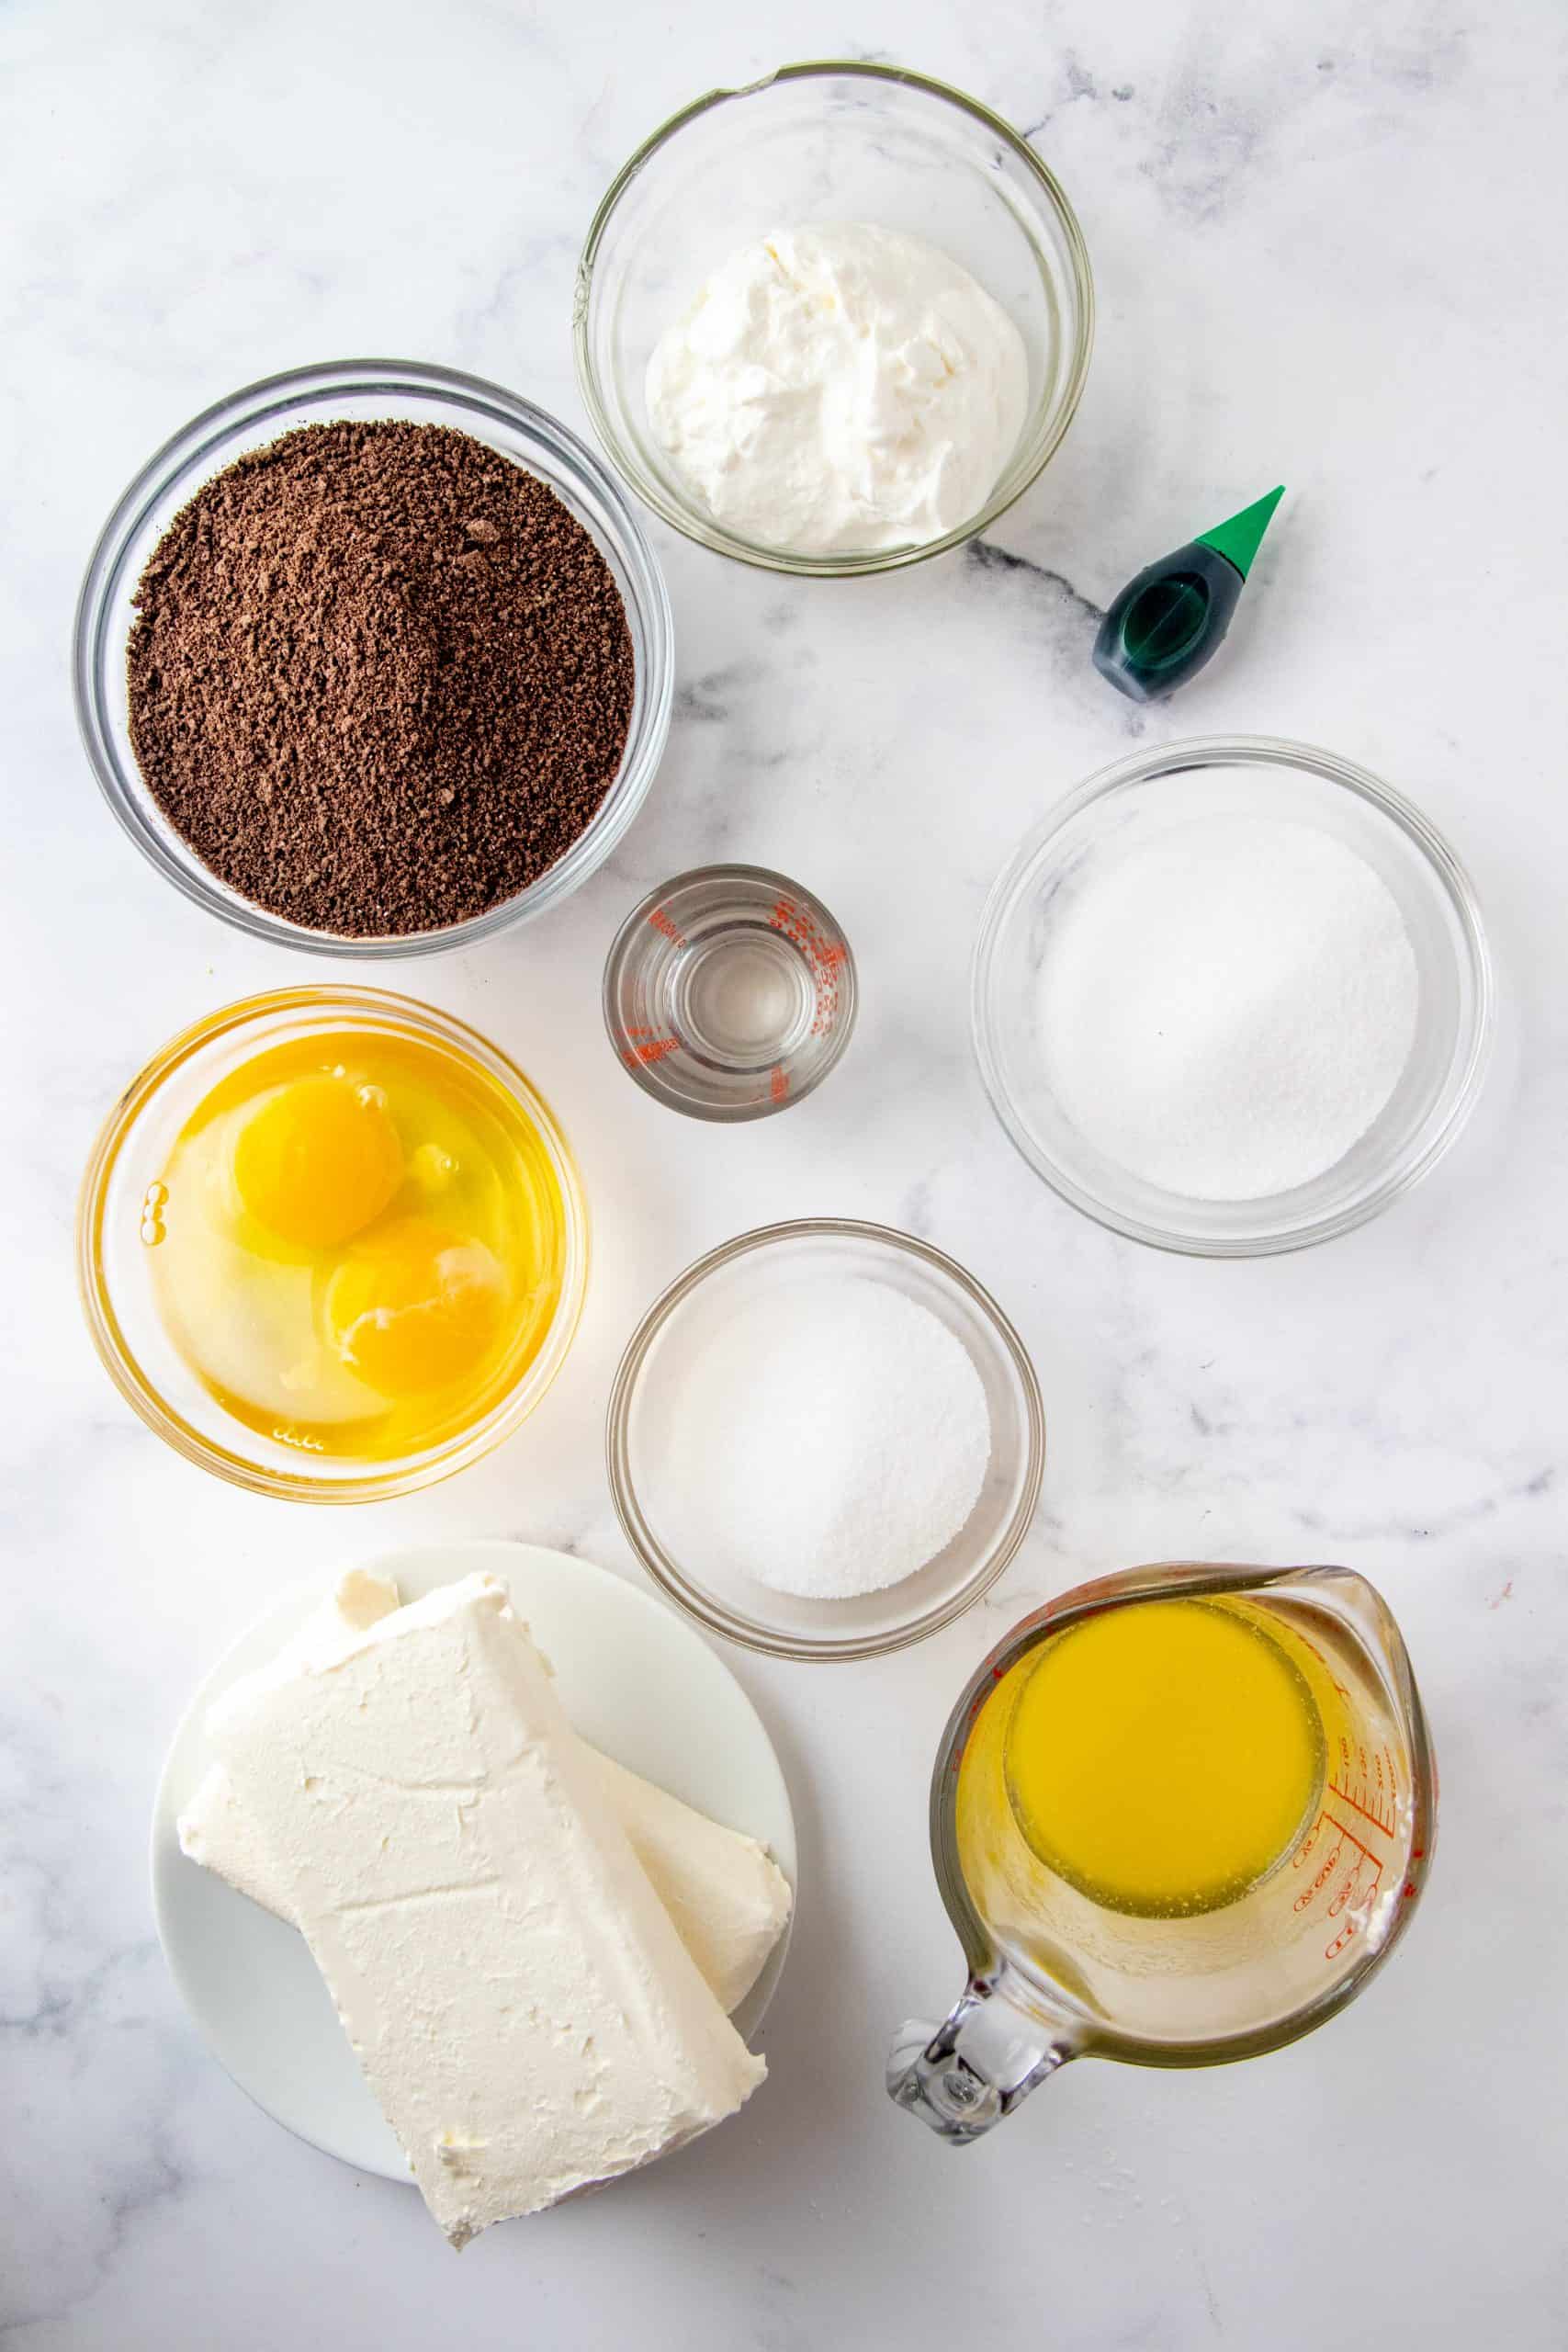 Ingredients needed to make Mini Mint Chocolate Cheesecakes: chocolate graham cracker crumbs, butter, sugar, cream cheese, sour cream, eggs, mint extract, green food coloring.